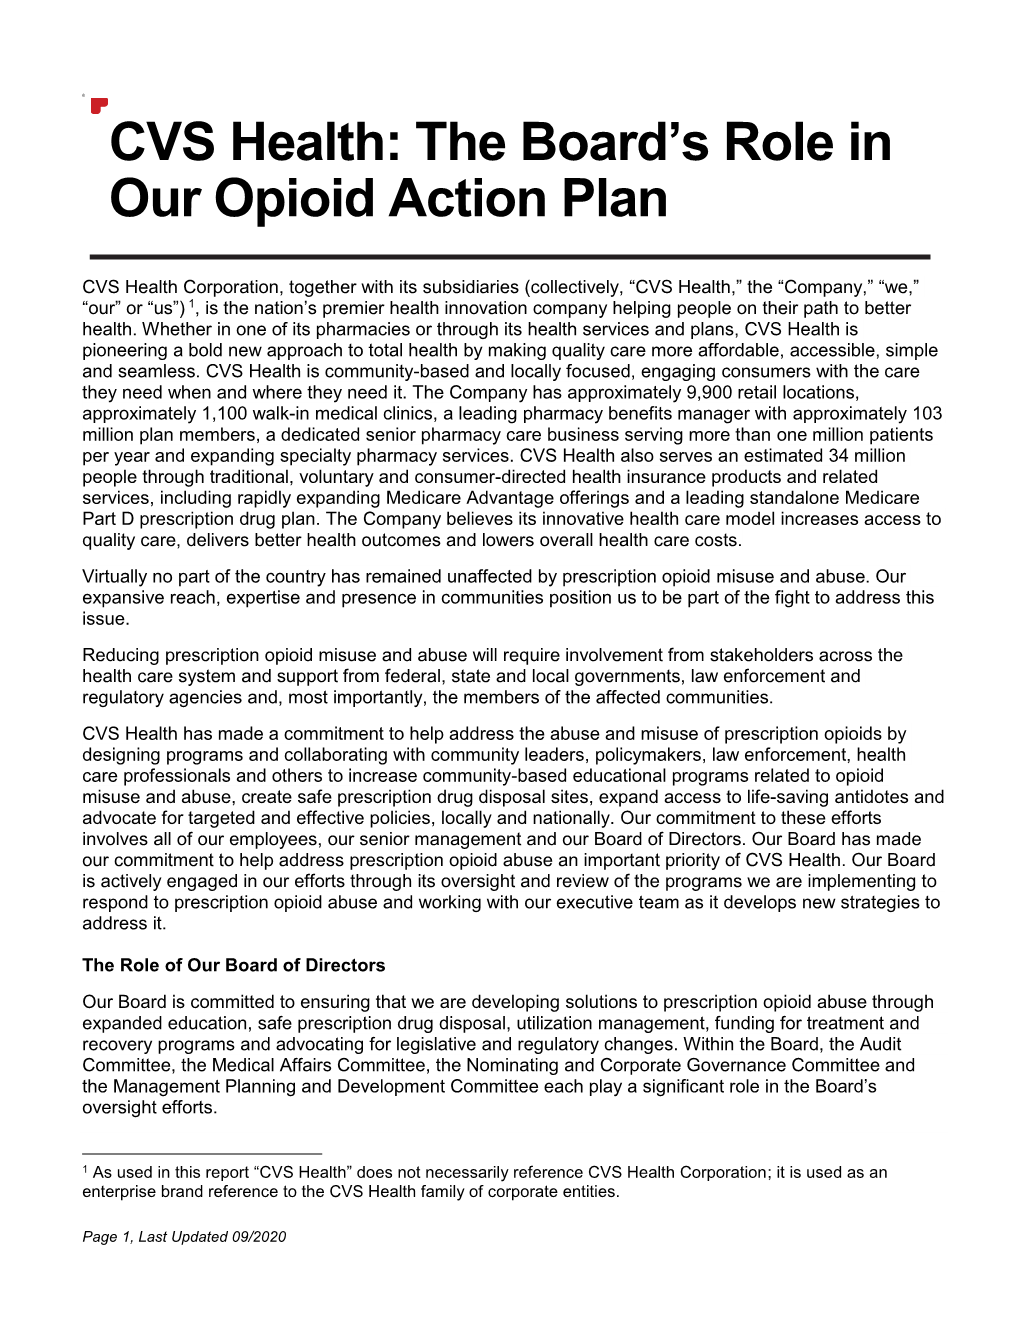 The Board's Role in Our Opioid Action Plan